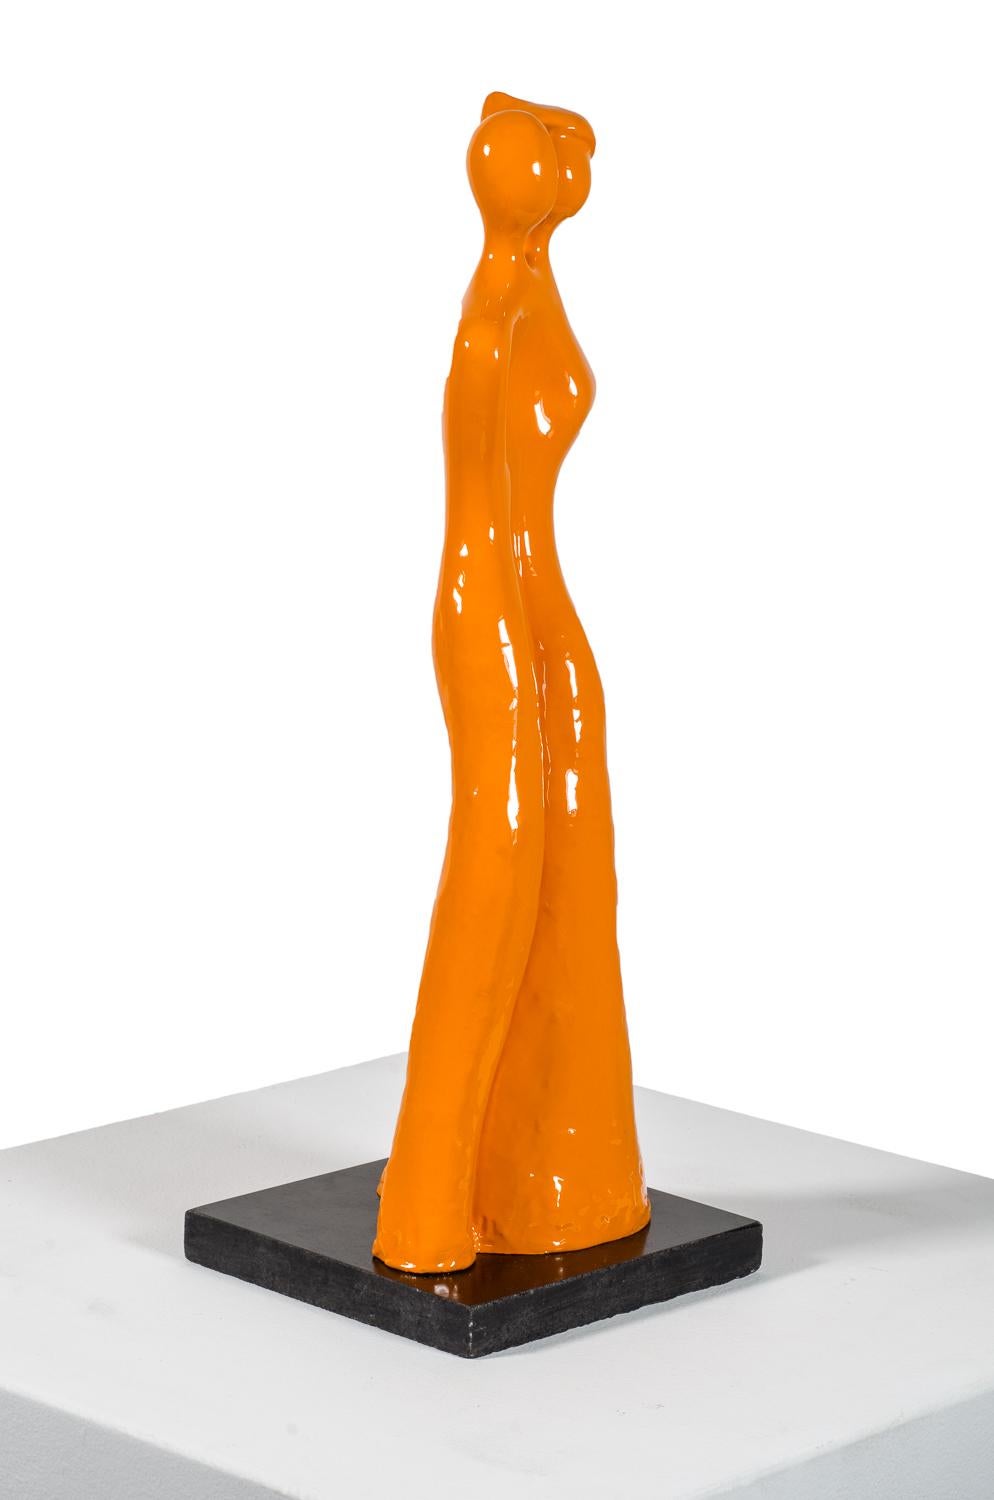 Soul Mates #1 (in orange) When in love their souls and bodies fuse into just one - Sculpture by Beatriz Gerenstein